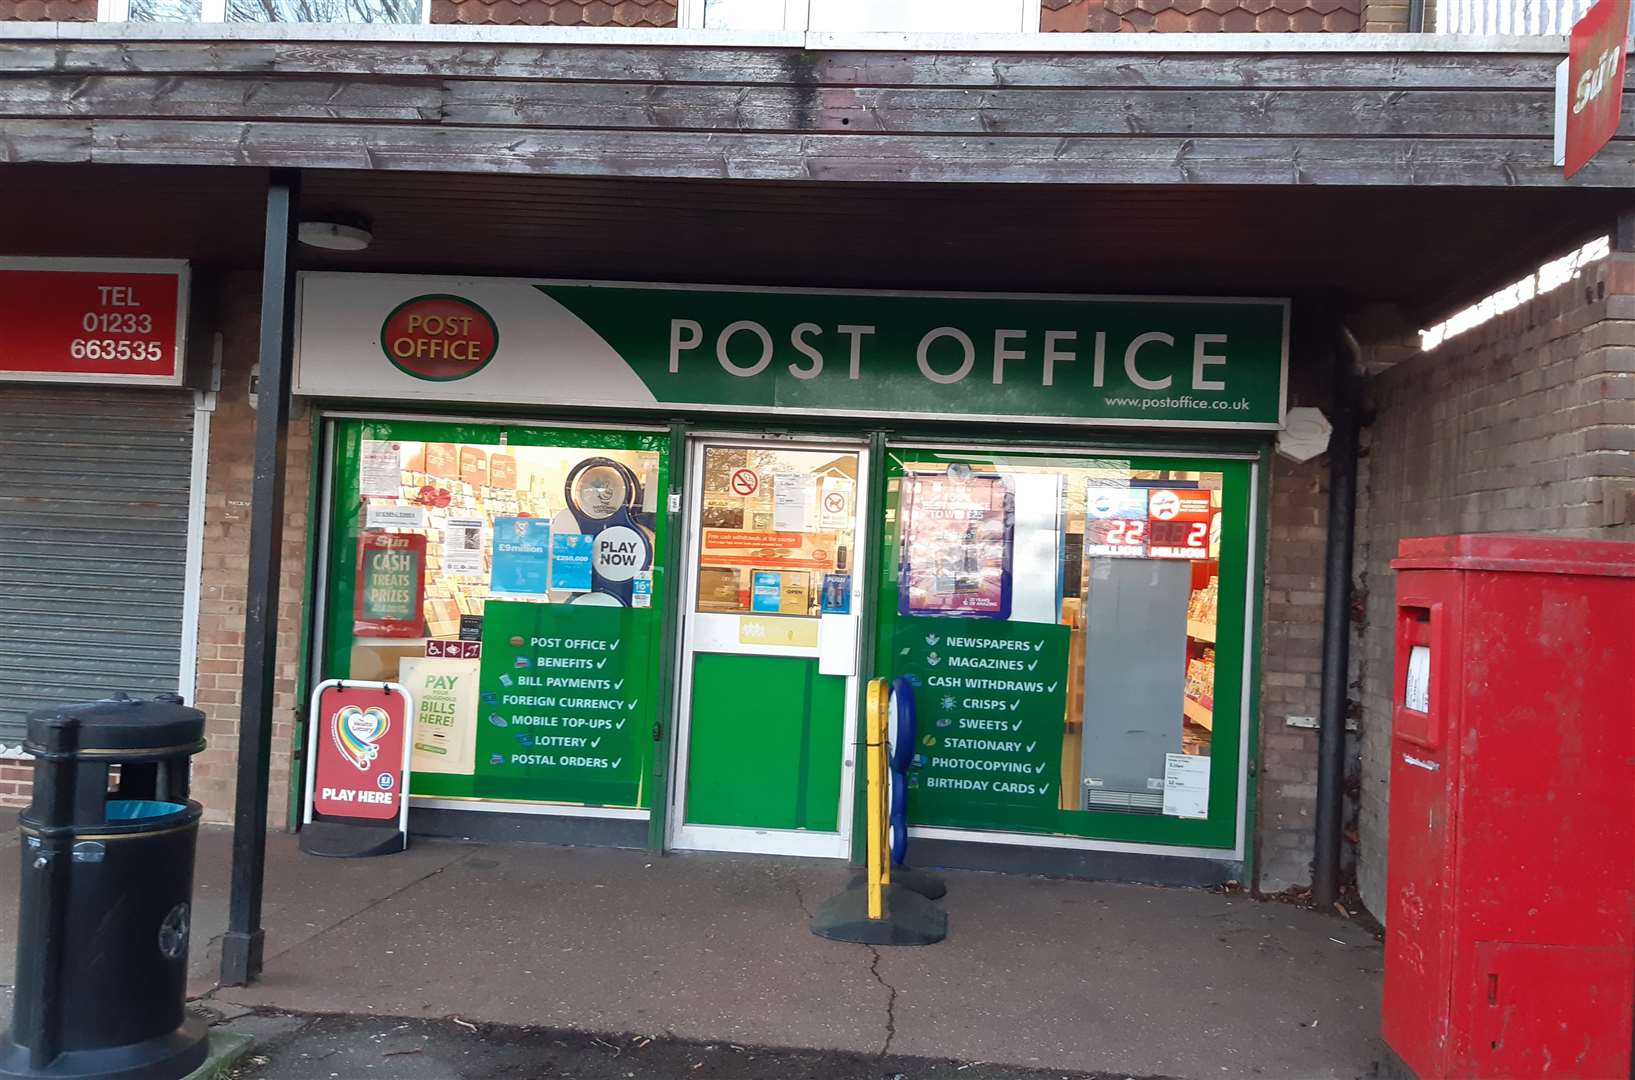 The Bockhanger Post Office was run by Sunny Dhanda